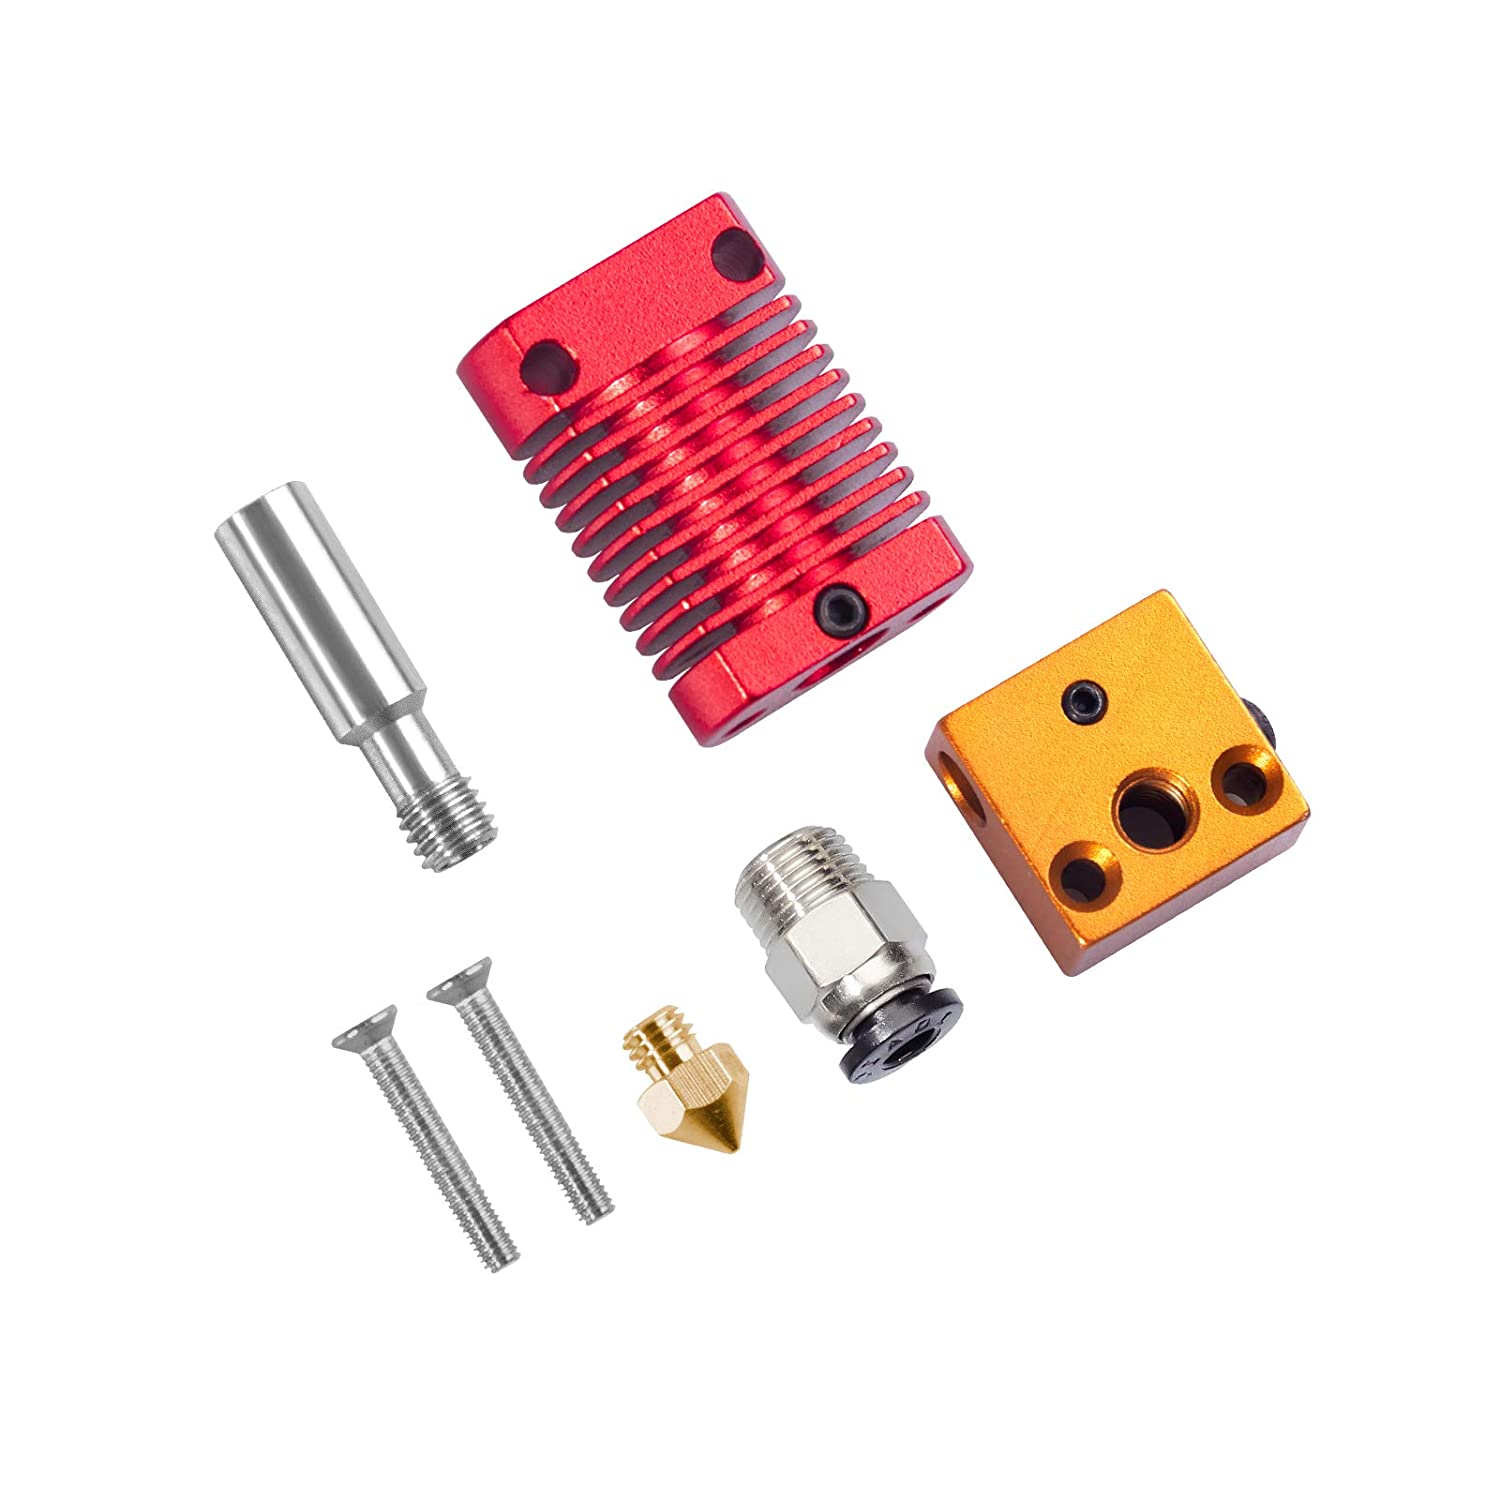 Creality 3D® Replacement Hotend Kit for Ender 3 / CR-10 Series 3D Printers